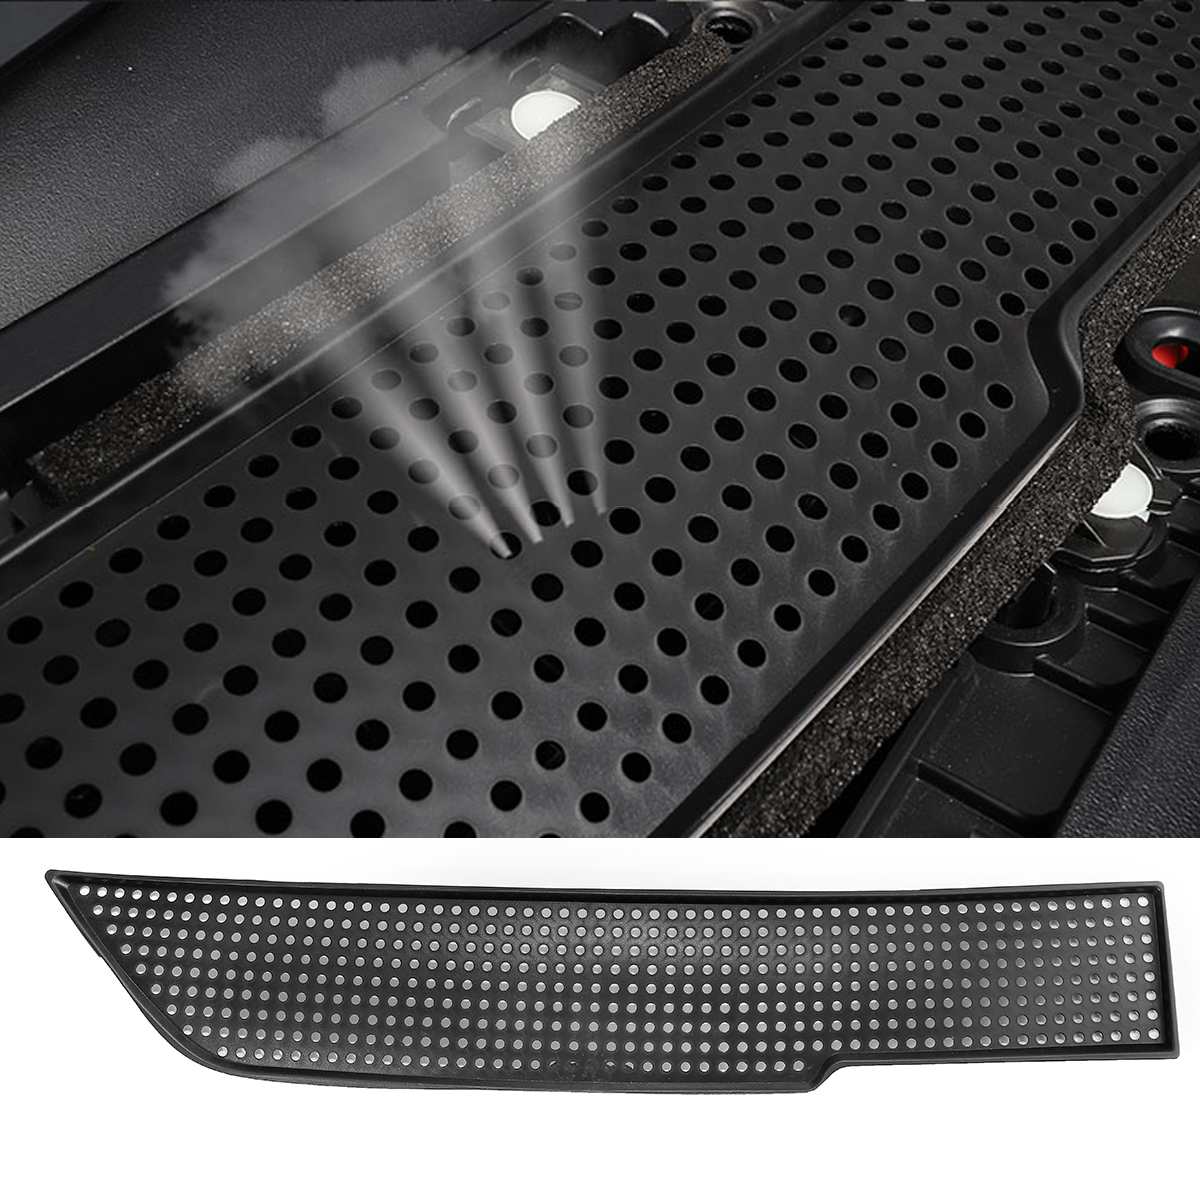 Air Inlet Vent Grille Cover Dustproof Anti-dirty Purification Air Filter Car Accessories For 2017-2020 Tesla Model 3